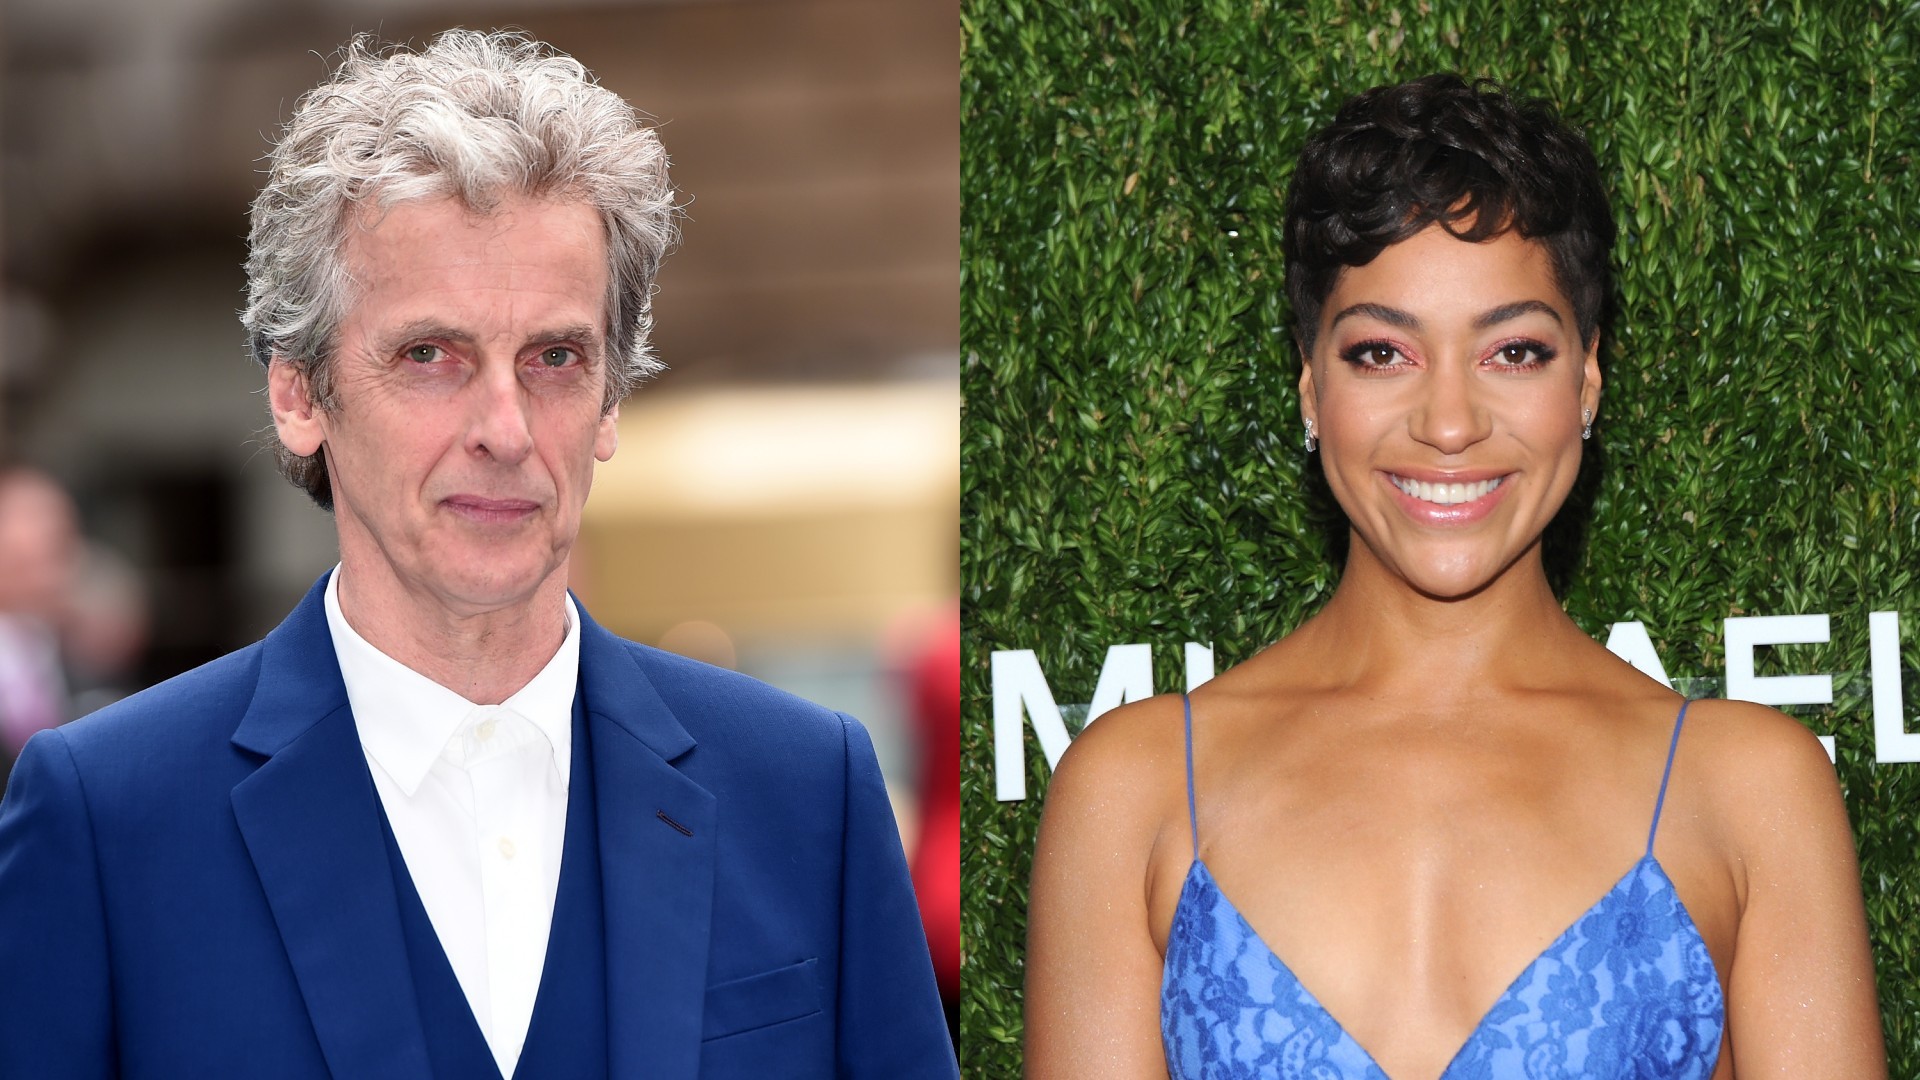 Casting News: Peter Capaldi and Cush Jumbo to Lead London-Based Thriller Series 'Criminal Record'